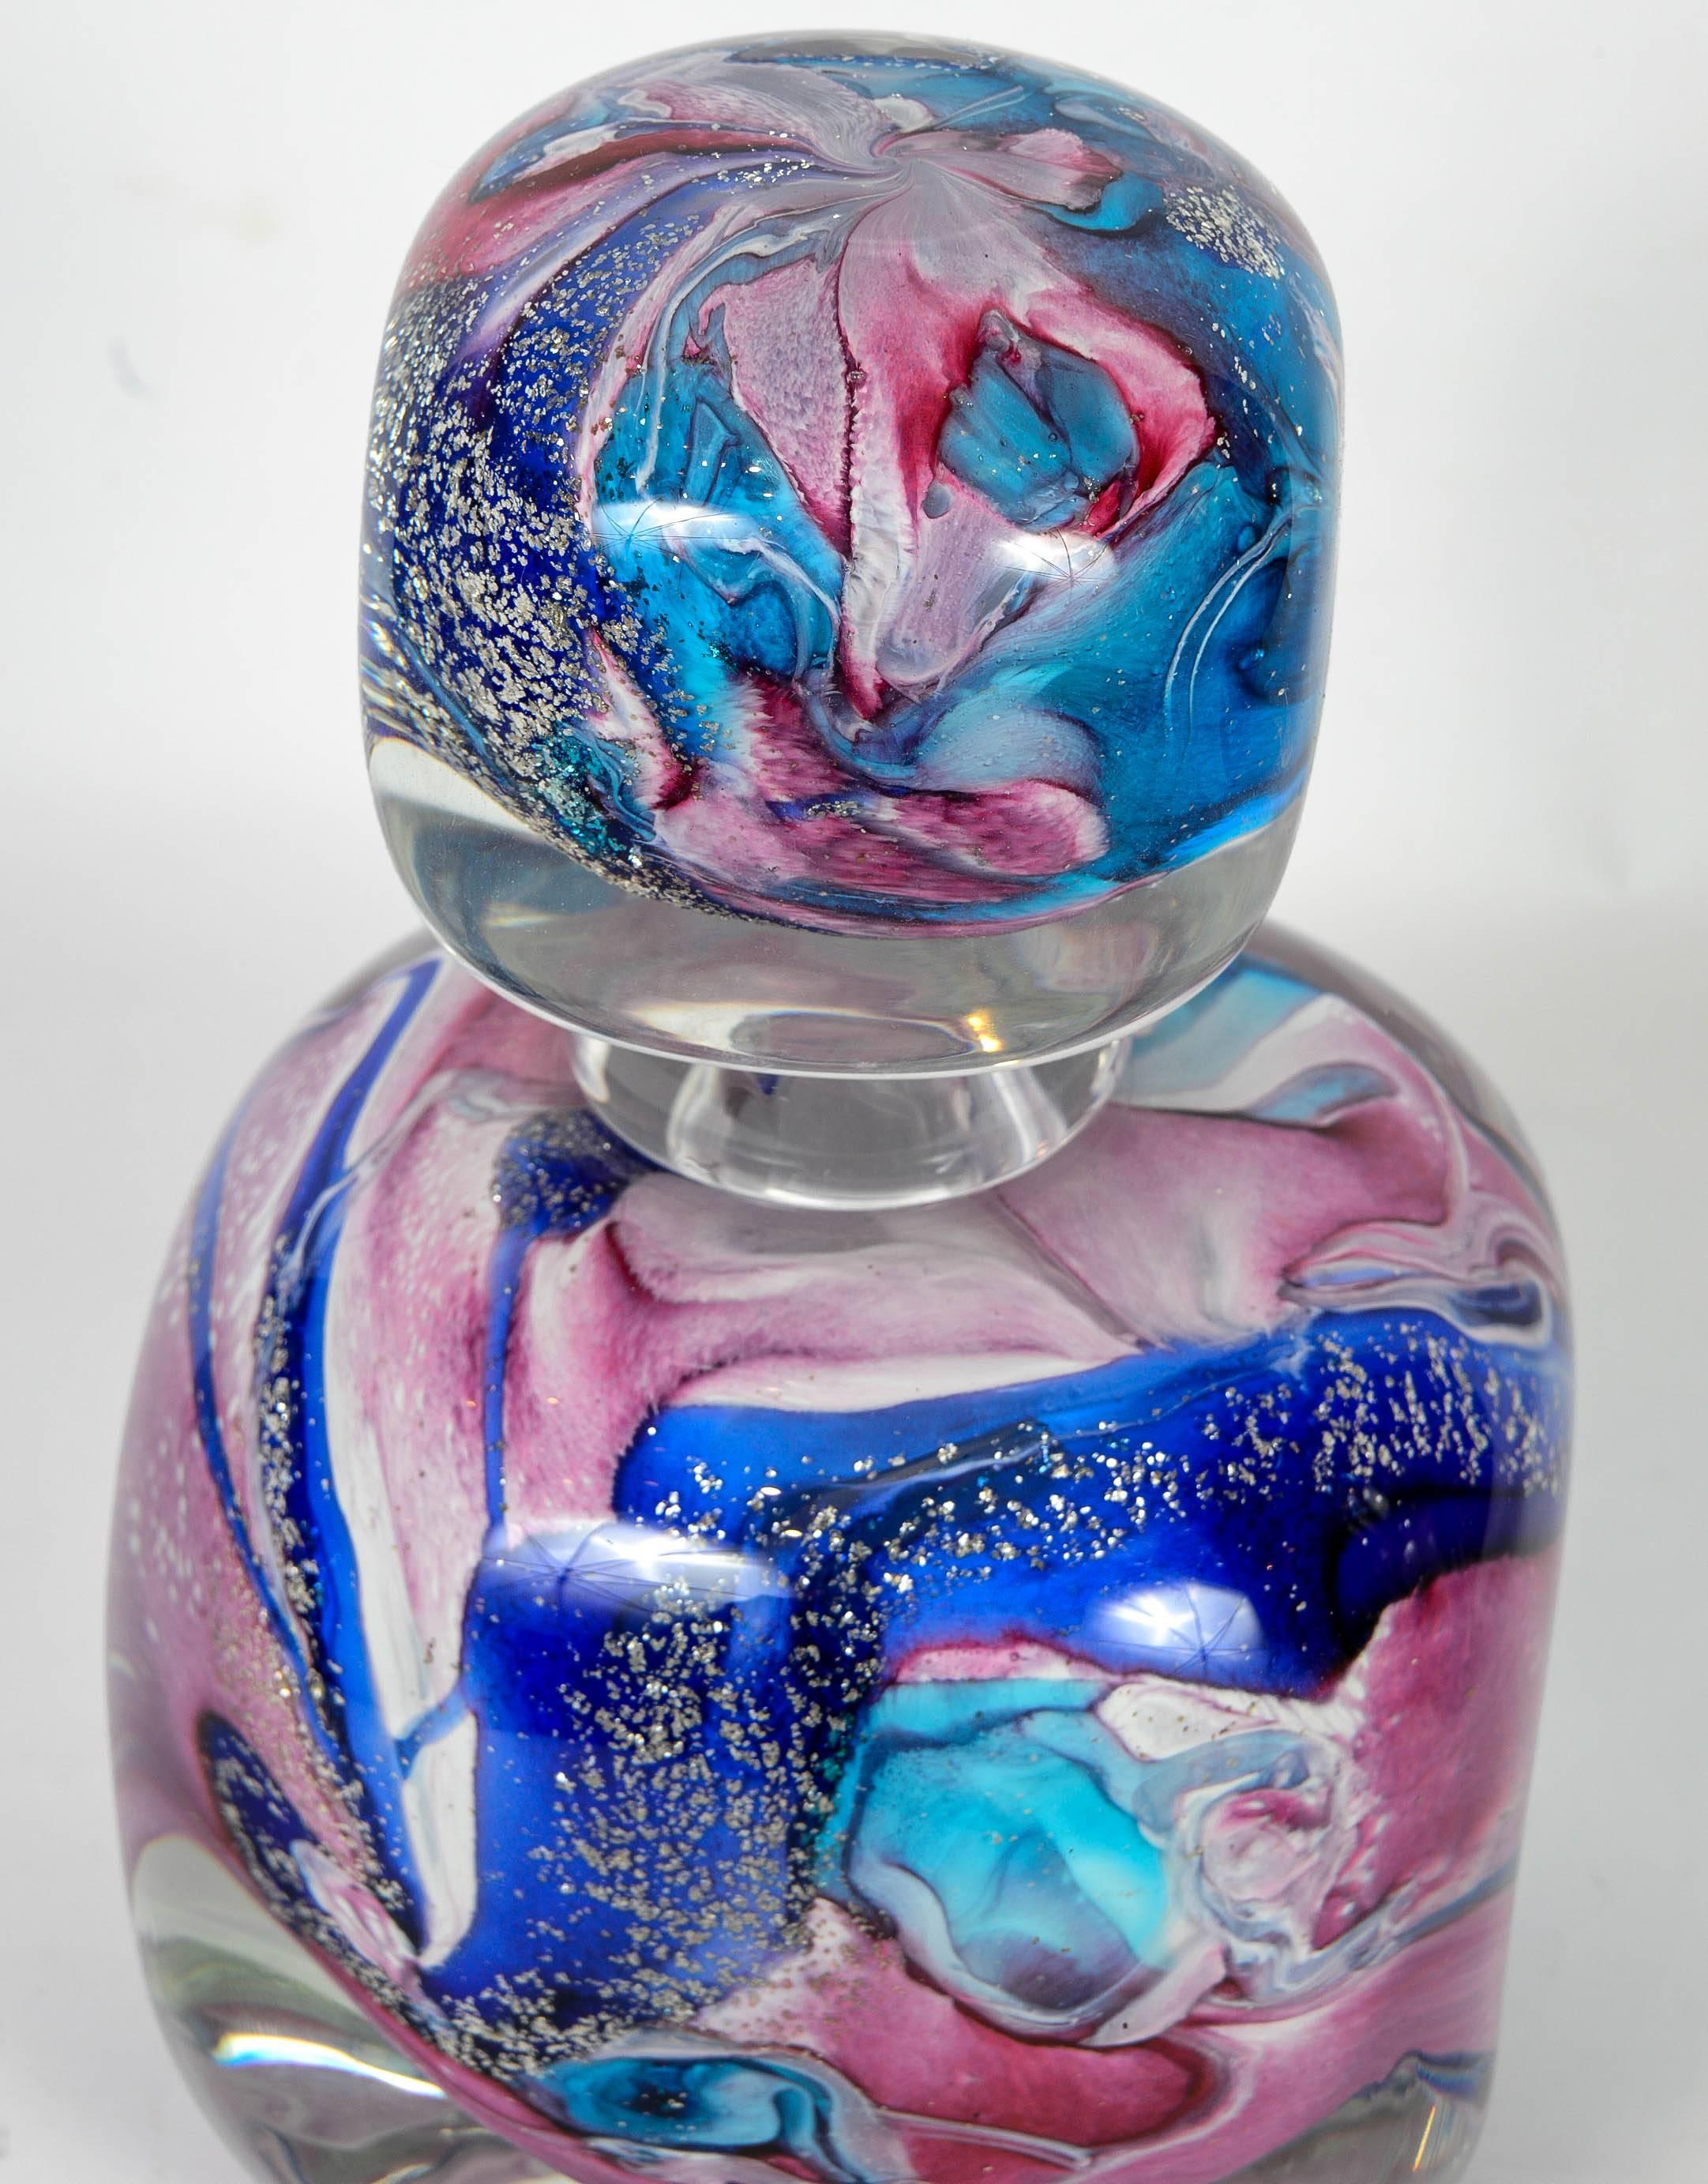 Pair of Perfume Bottles in Murano Glass, Signed by Michele Onesto 2